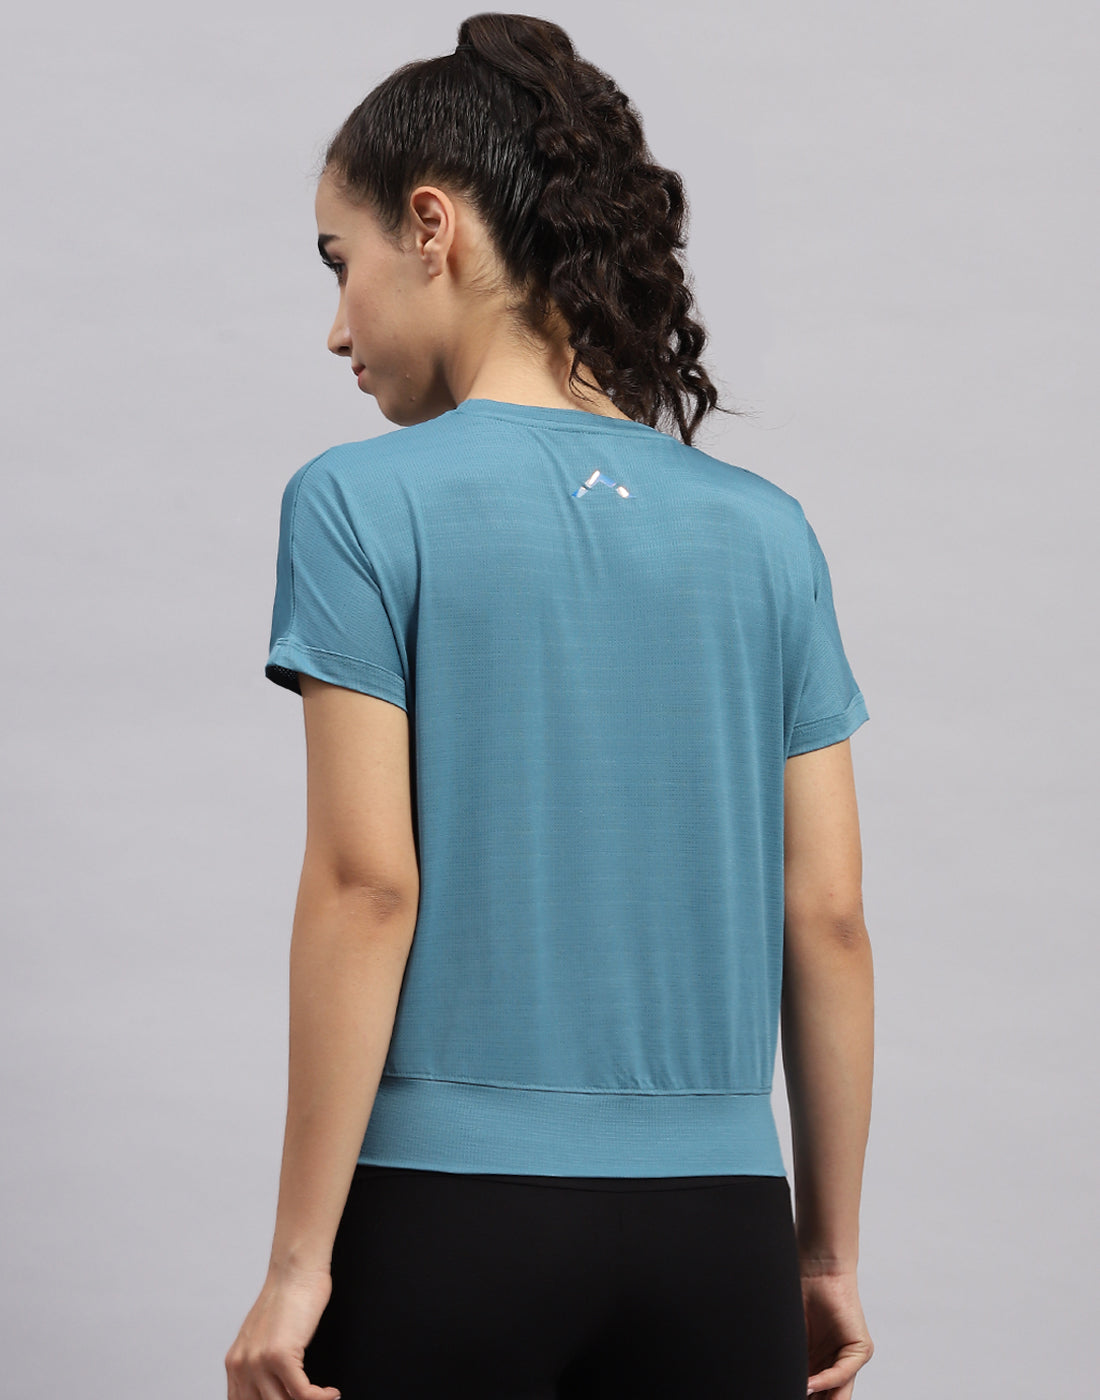 Women Turquoise Blue Solid Round Neck Half Sleeve Top